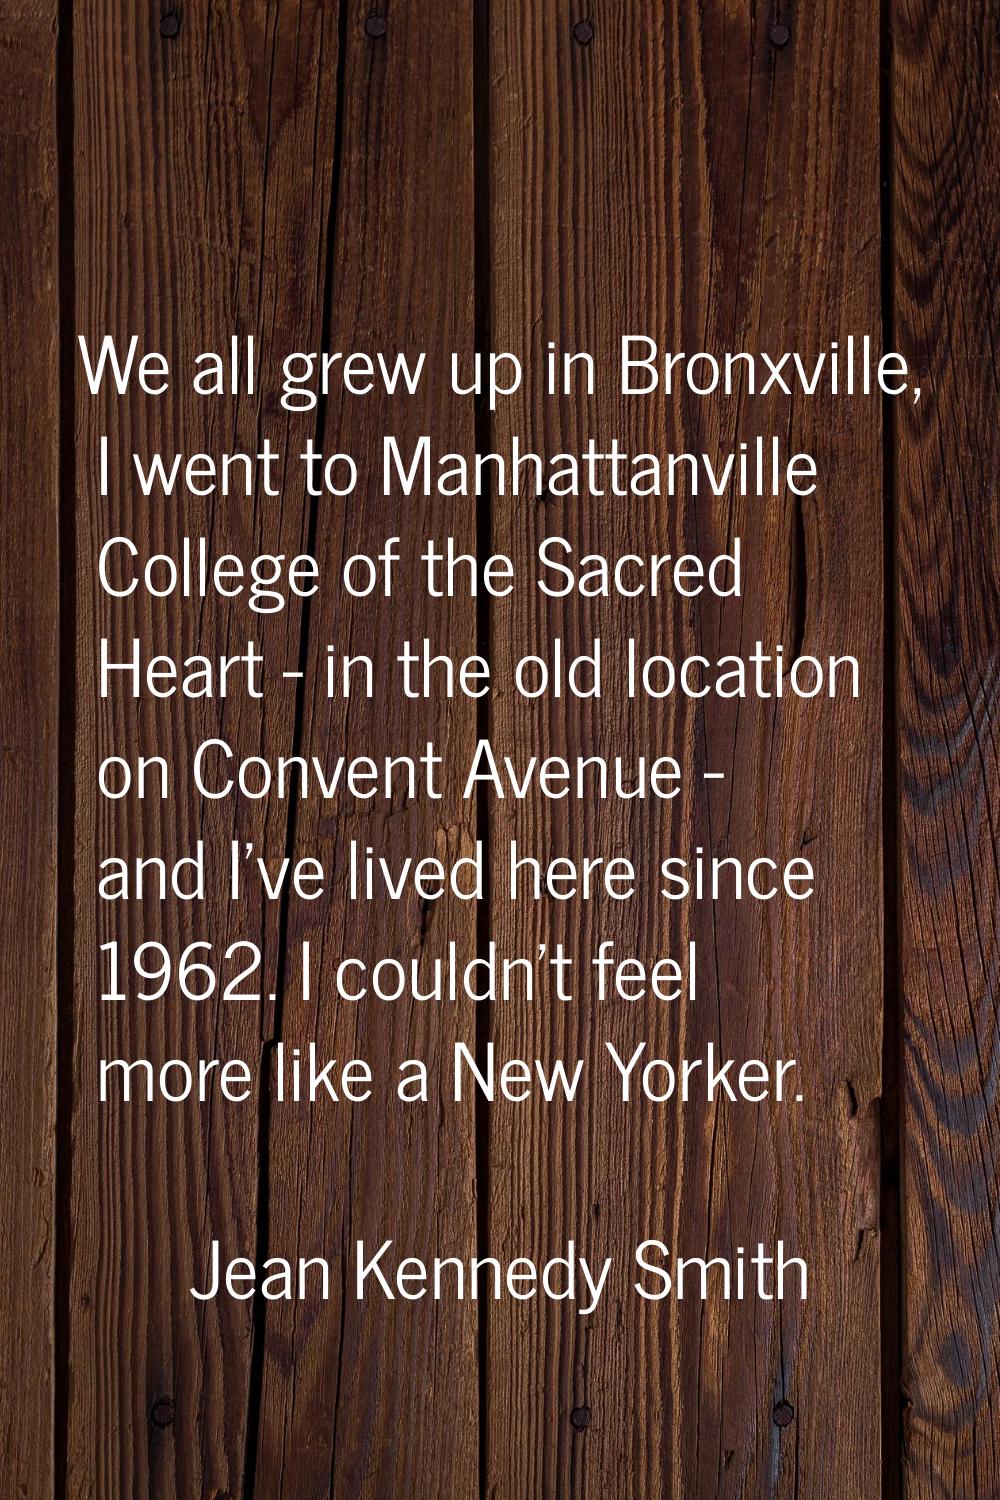 We all grew up in Bronxville, I went to Manhattanville College of the Sacred Heart - in the old loc